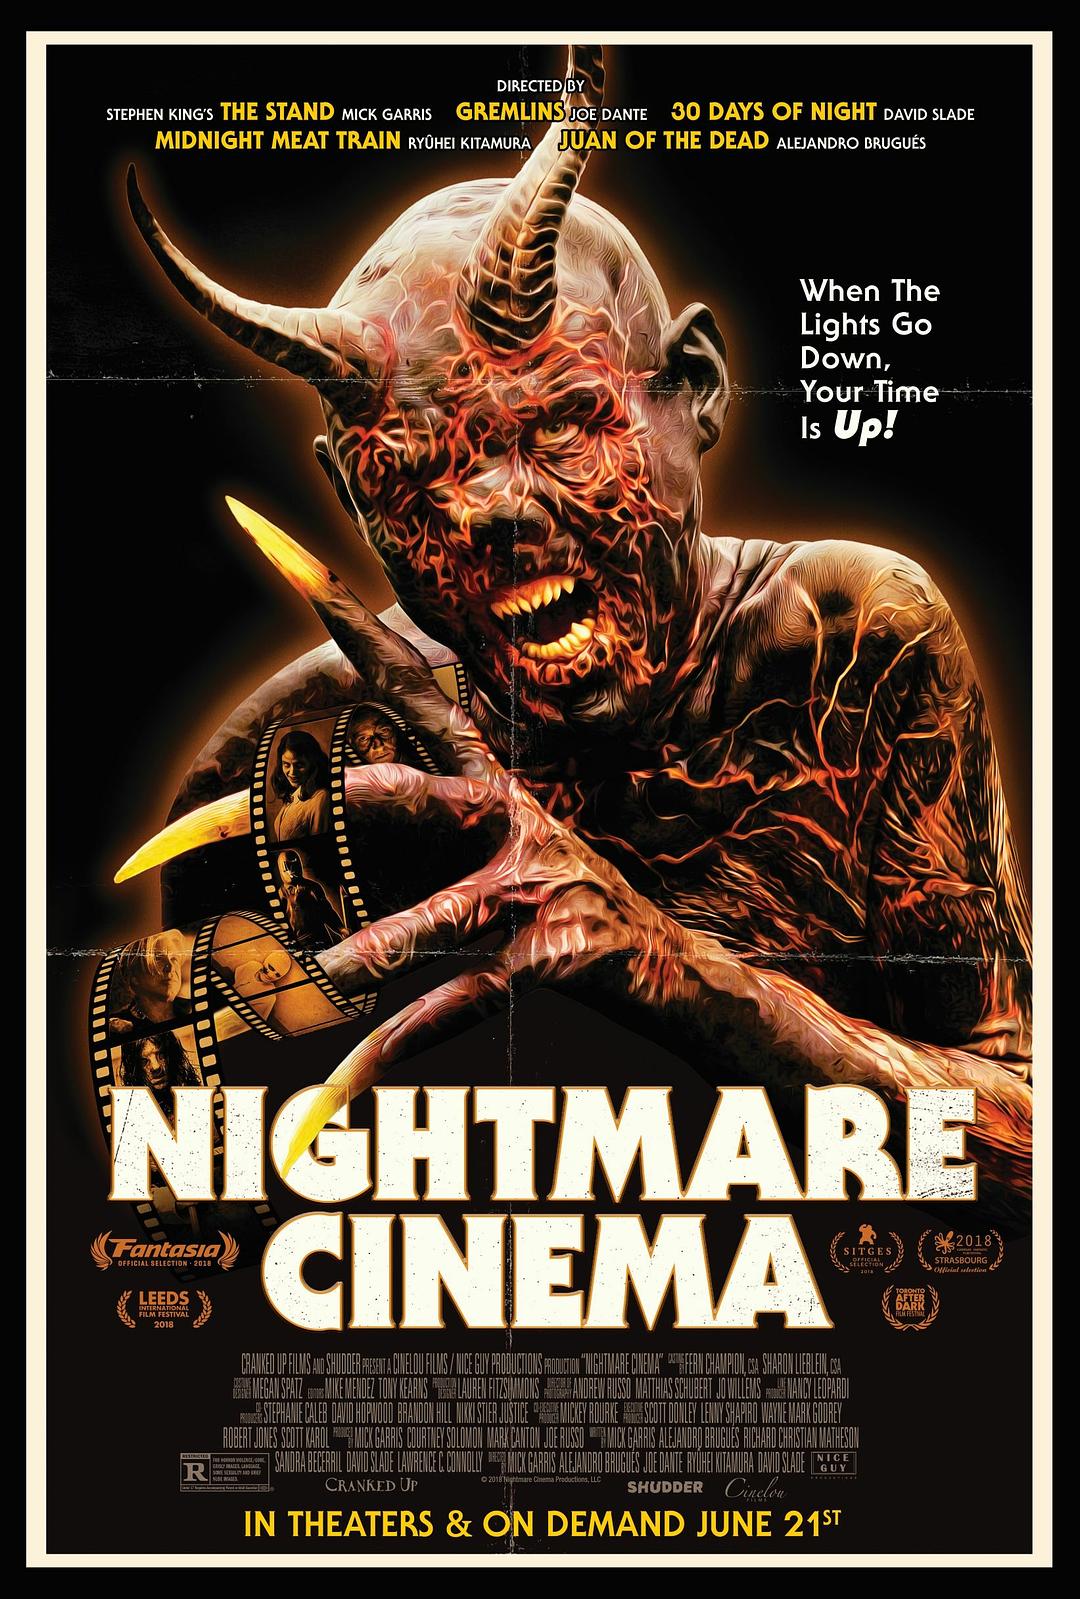 جεӰ/جεӰԺ Nightmare.Cinema.2018.1080p.BluRay.REMUX.AVC.DTS-HD.MA.5.1-FGT 19.76G-1.png